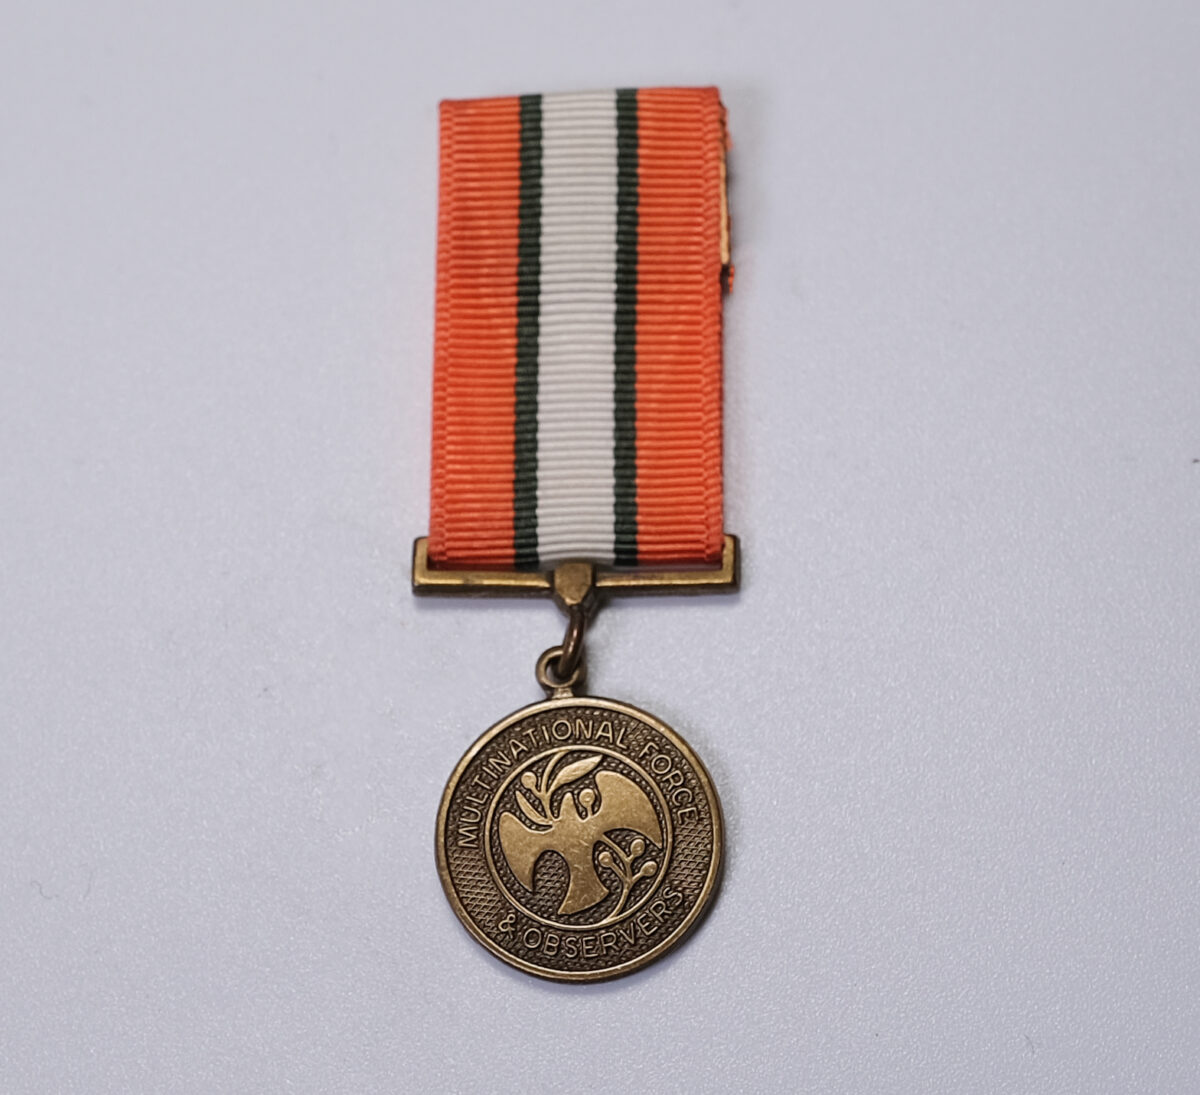 Multinational Force and Observers Medal.